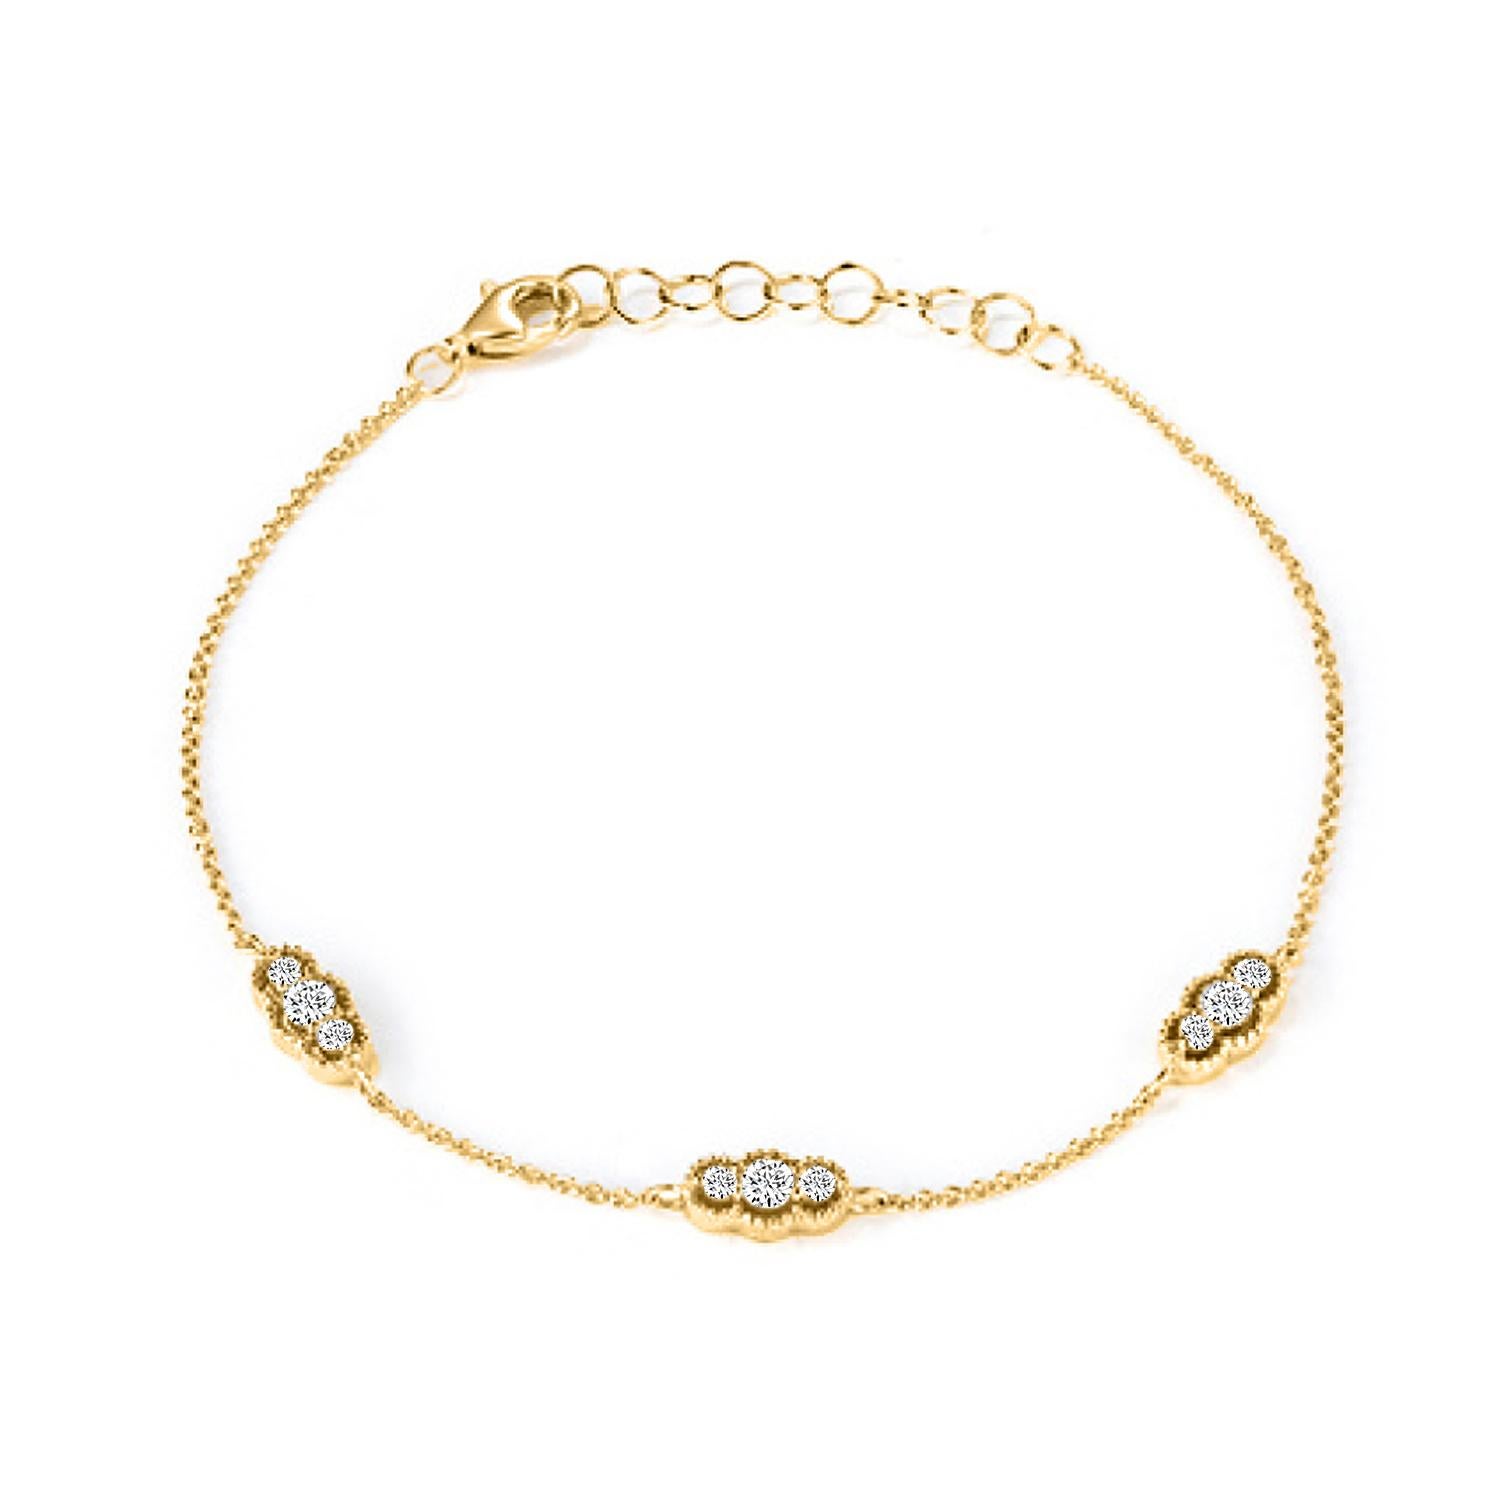 14K Gold Fashion Natural Diamond Bracelet

Bracelet Information
Diamond Type : Natural Diamond
Metal : 14k Gold
Metal Color : Rose Gold, Yellow Gold, White Gold
Total Carat Weight : 0.34 ttcw
Diamond colour-clarity : G/H Color VS/Si1 Clarity
